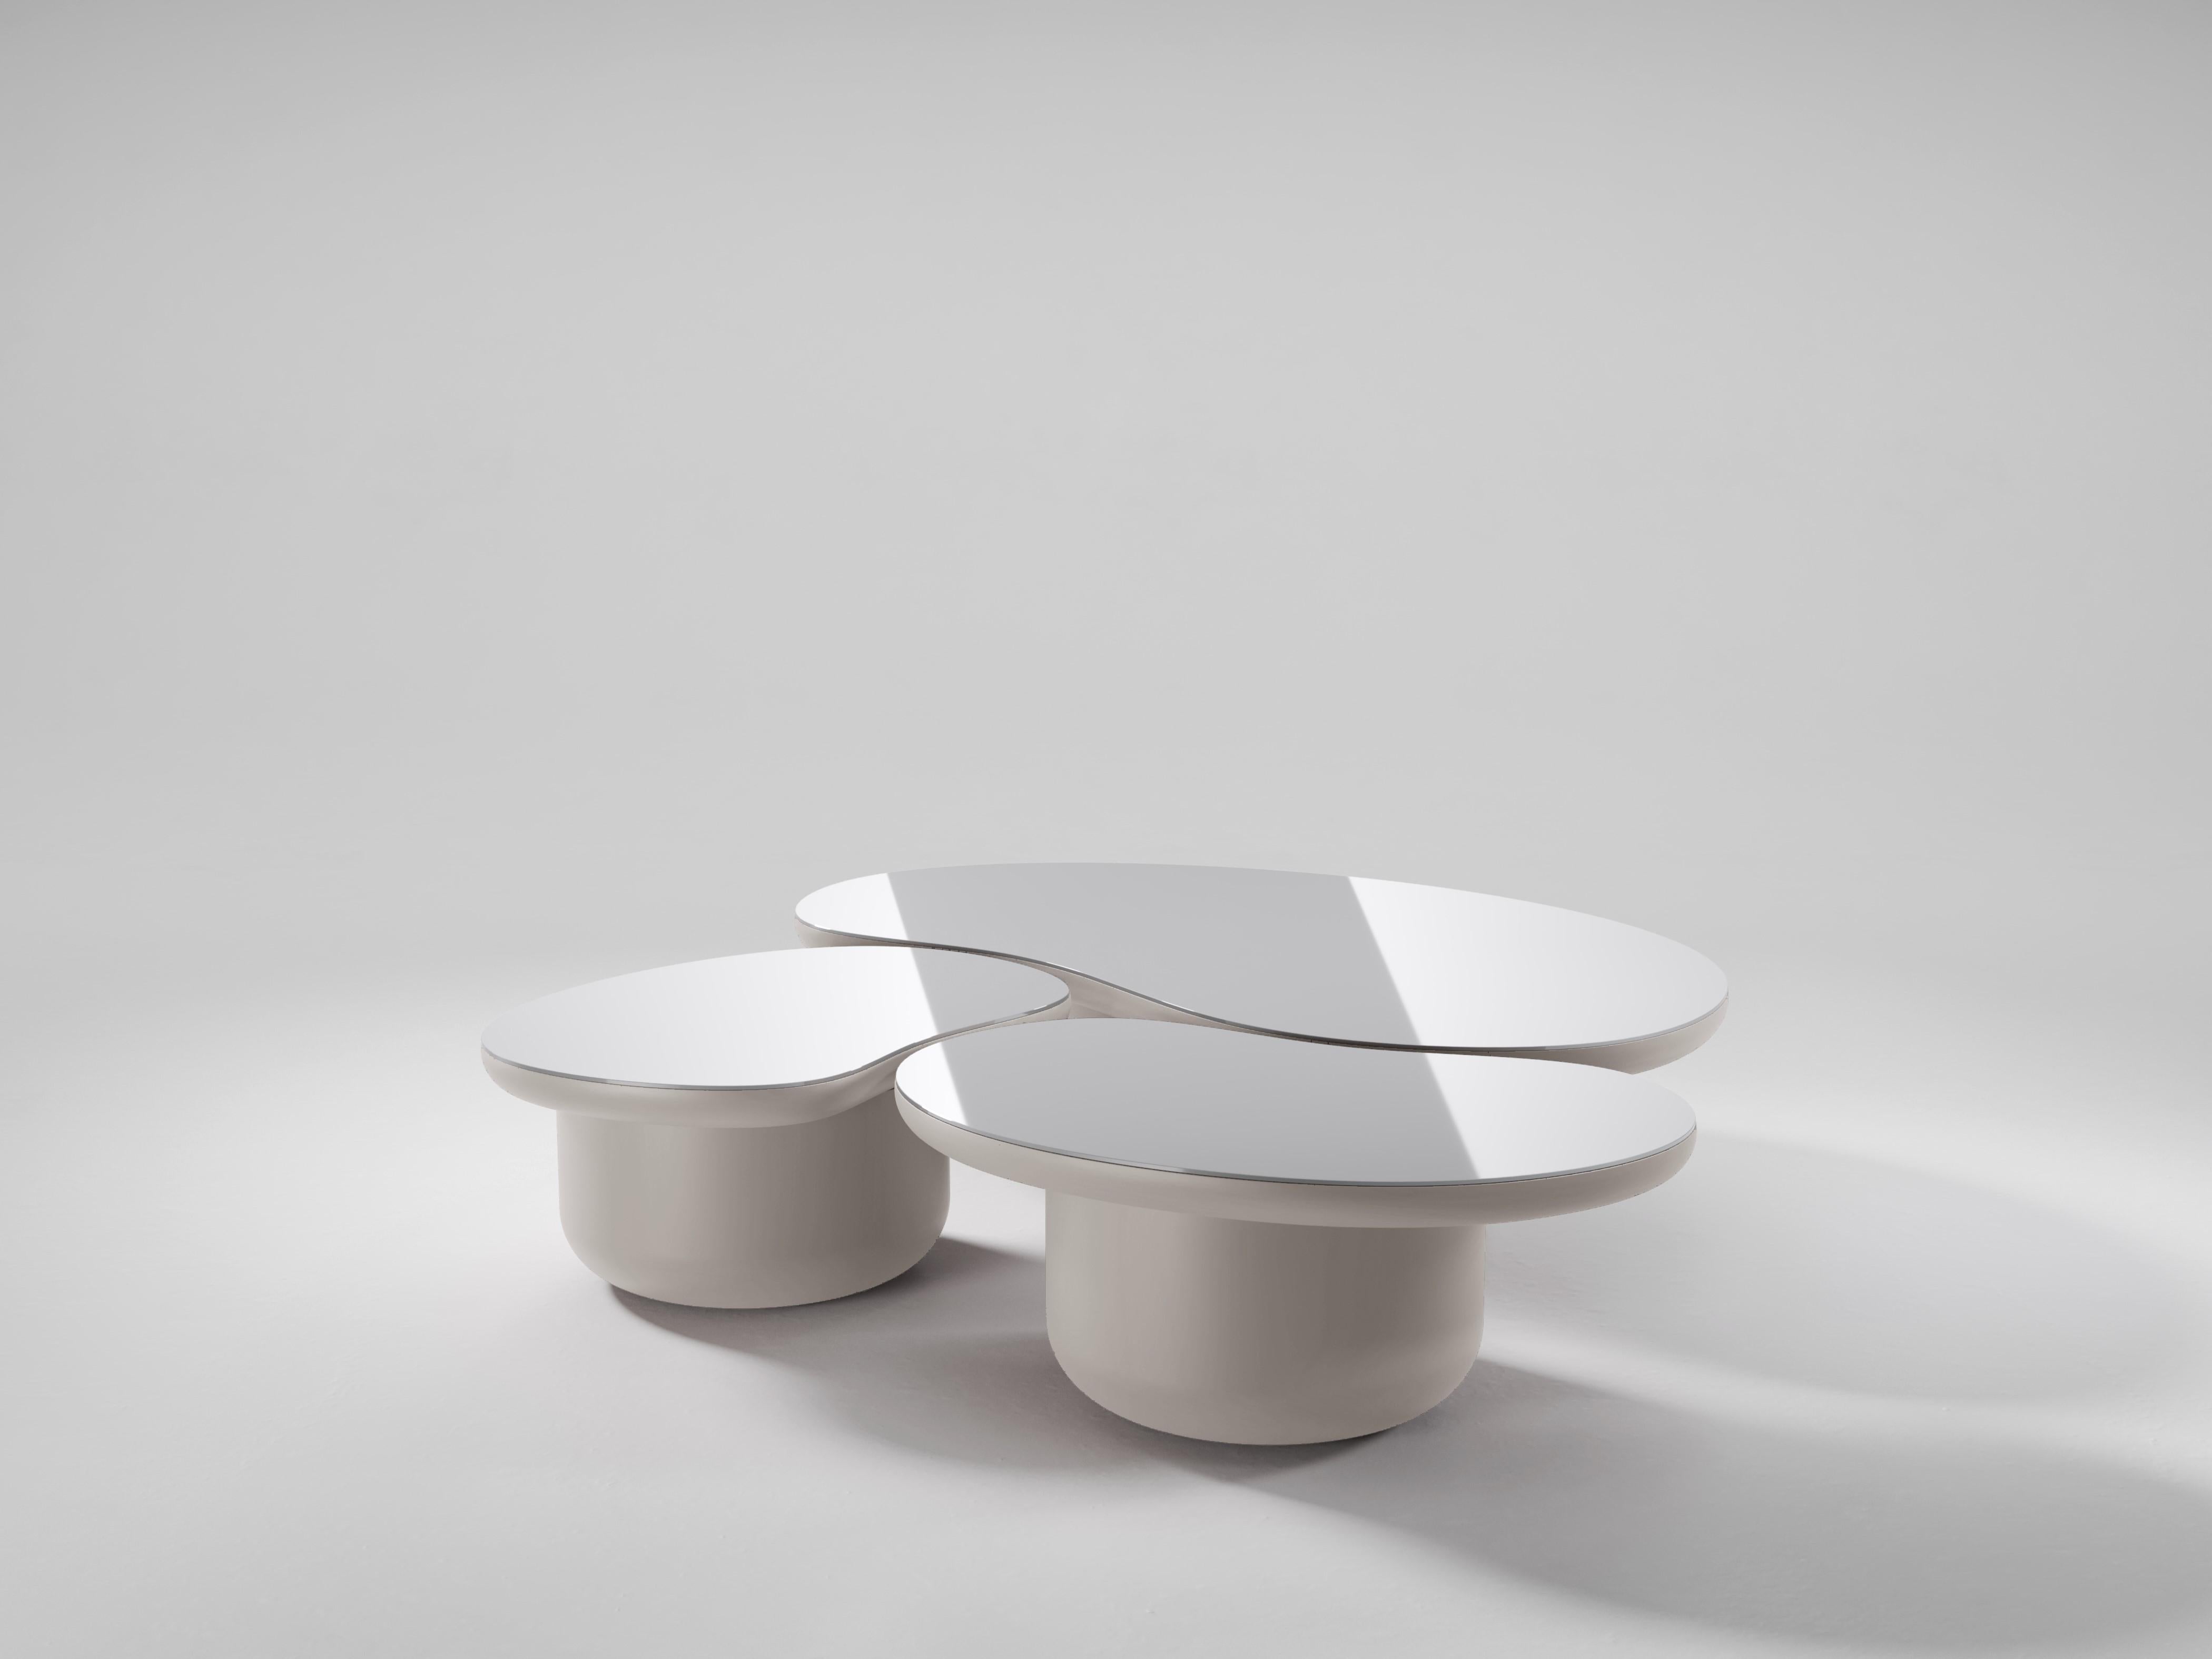 The Laghi coffee tables are a group of low coffee tables, each in the shape of a body of water and inspired by the peacefulness and beauty of the Lake District in United Kingdom. Each table is topped with a polished piece of aluminium to symbolise